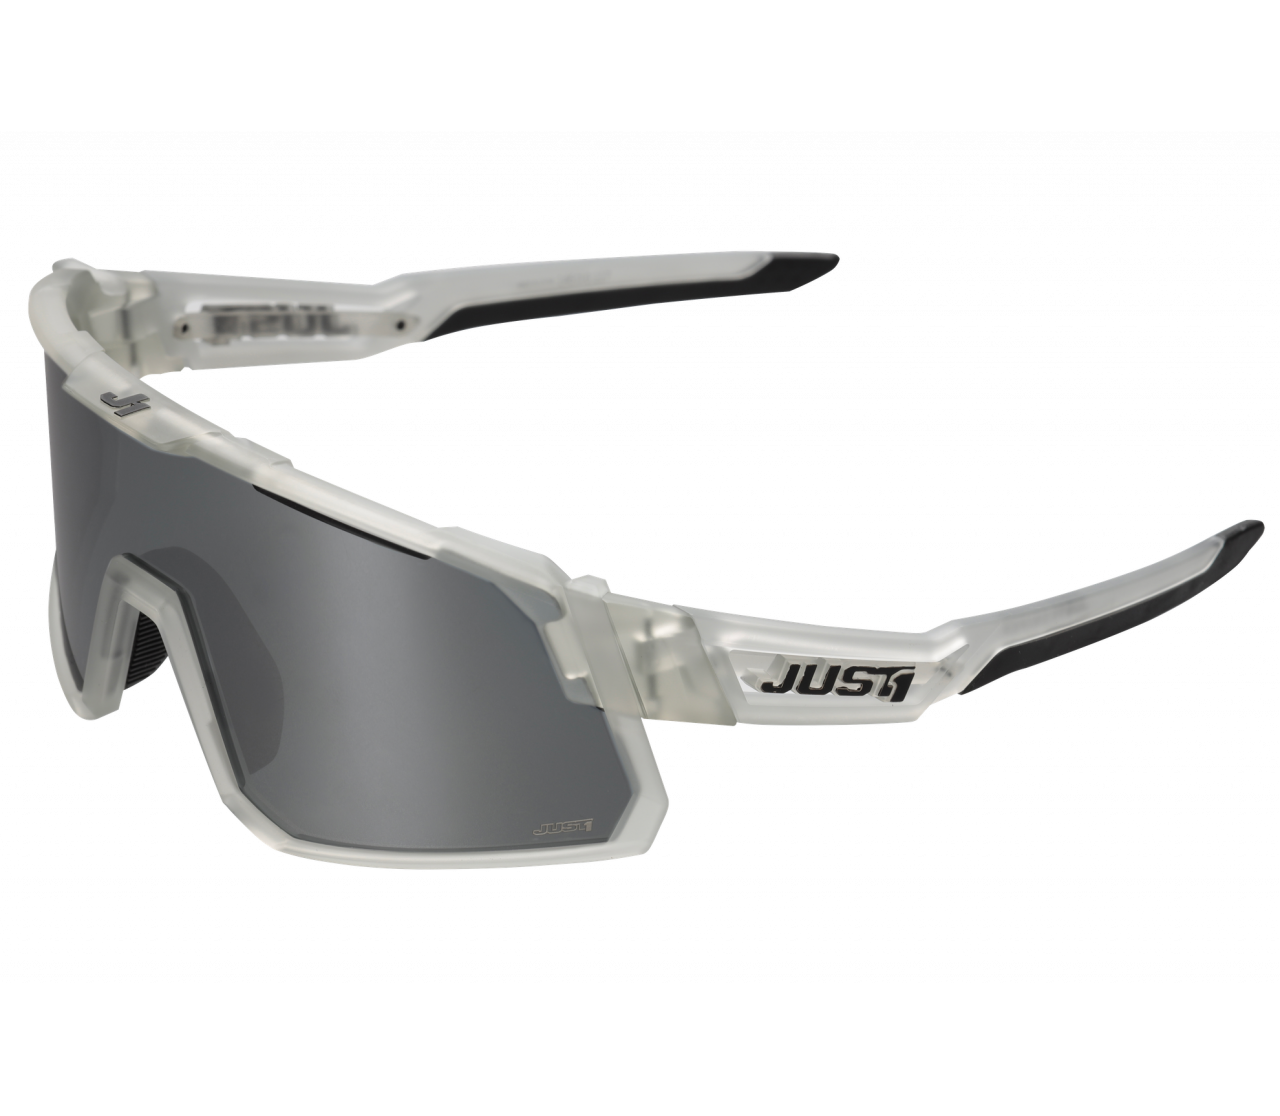 JUST1 SNIPER CLEAR GREY/BLACK with silver mirror lens